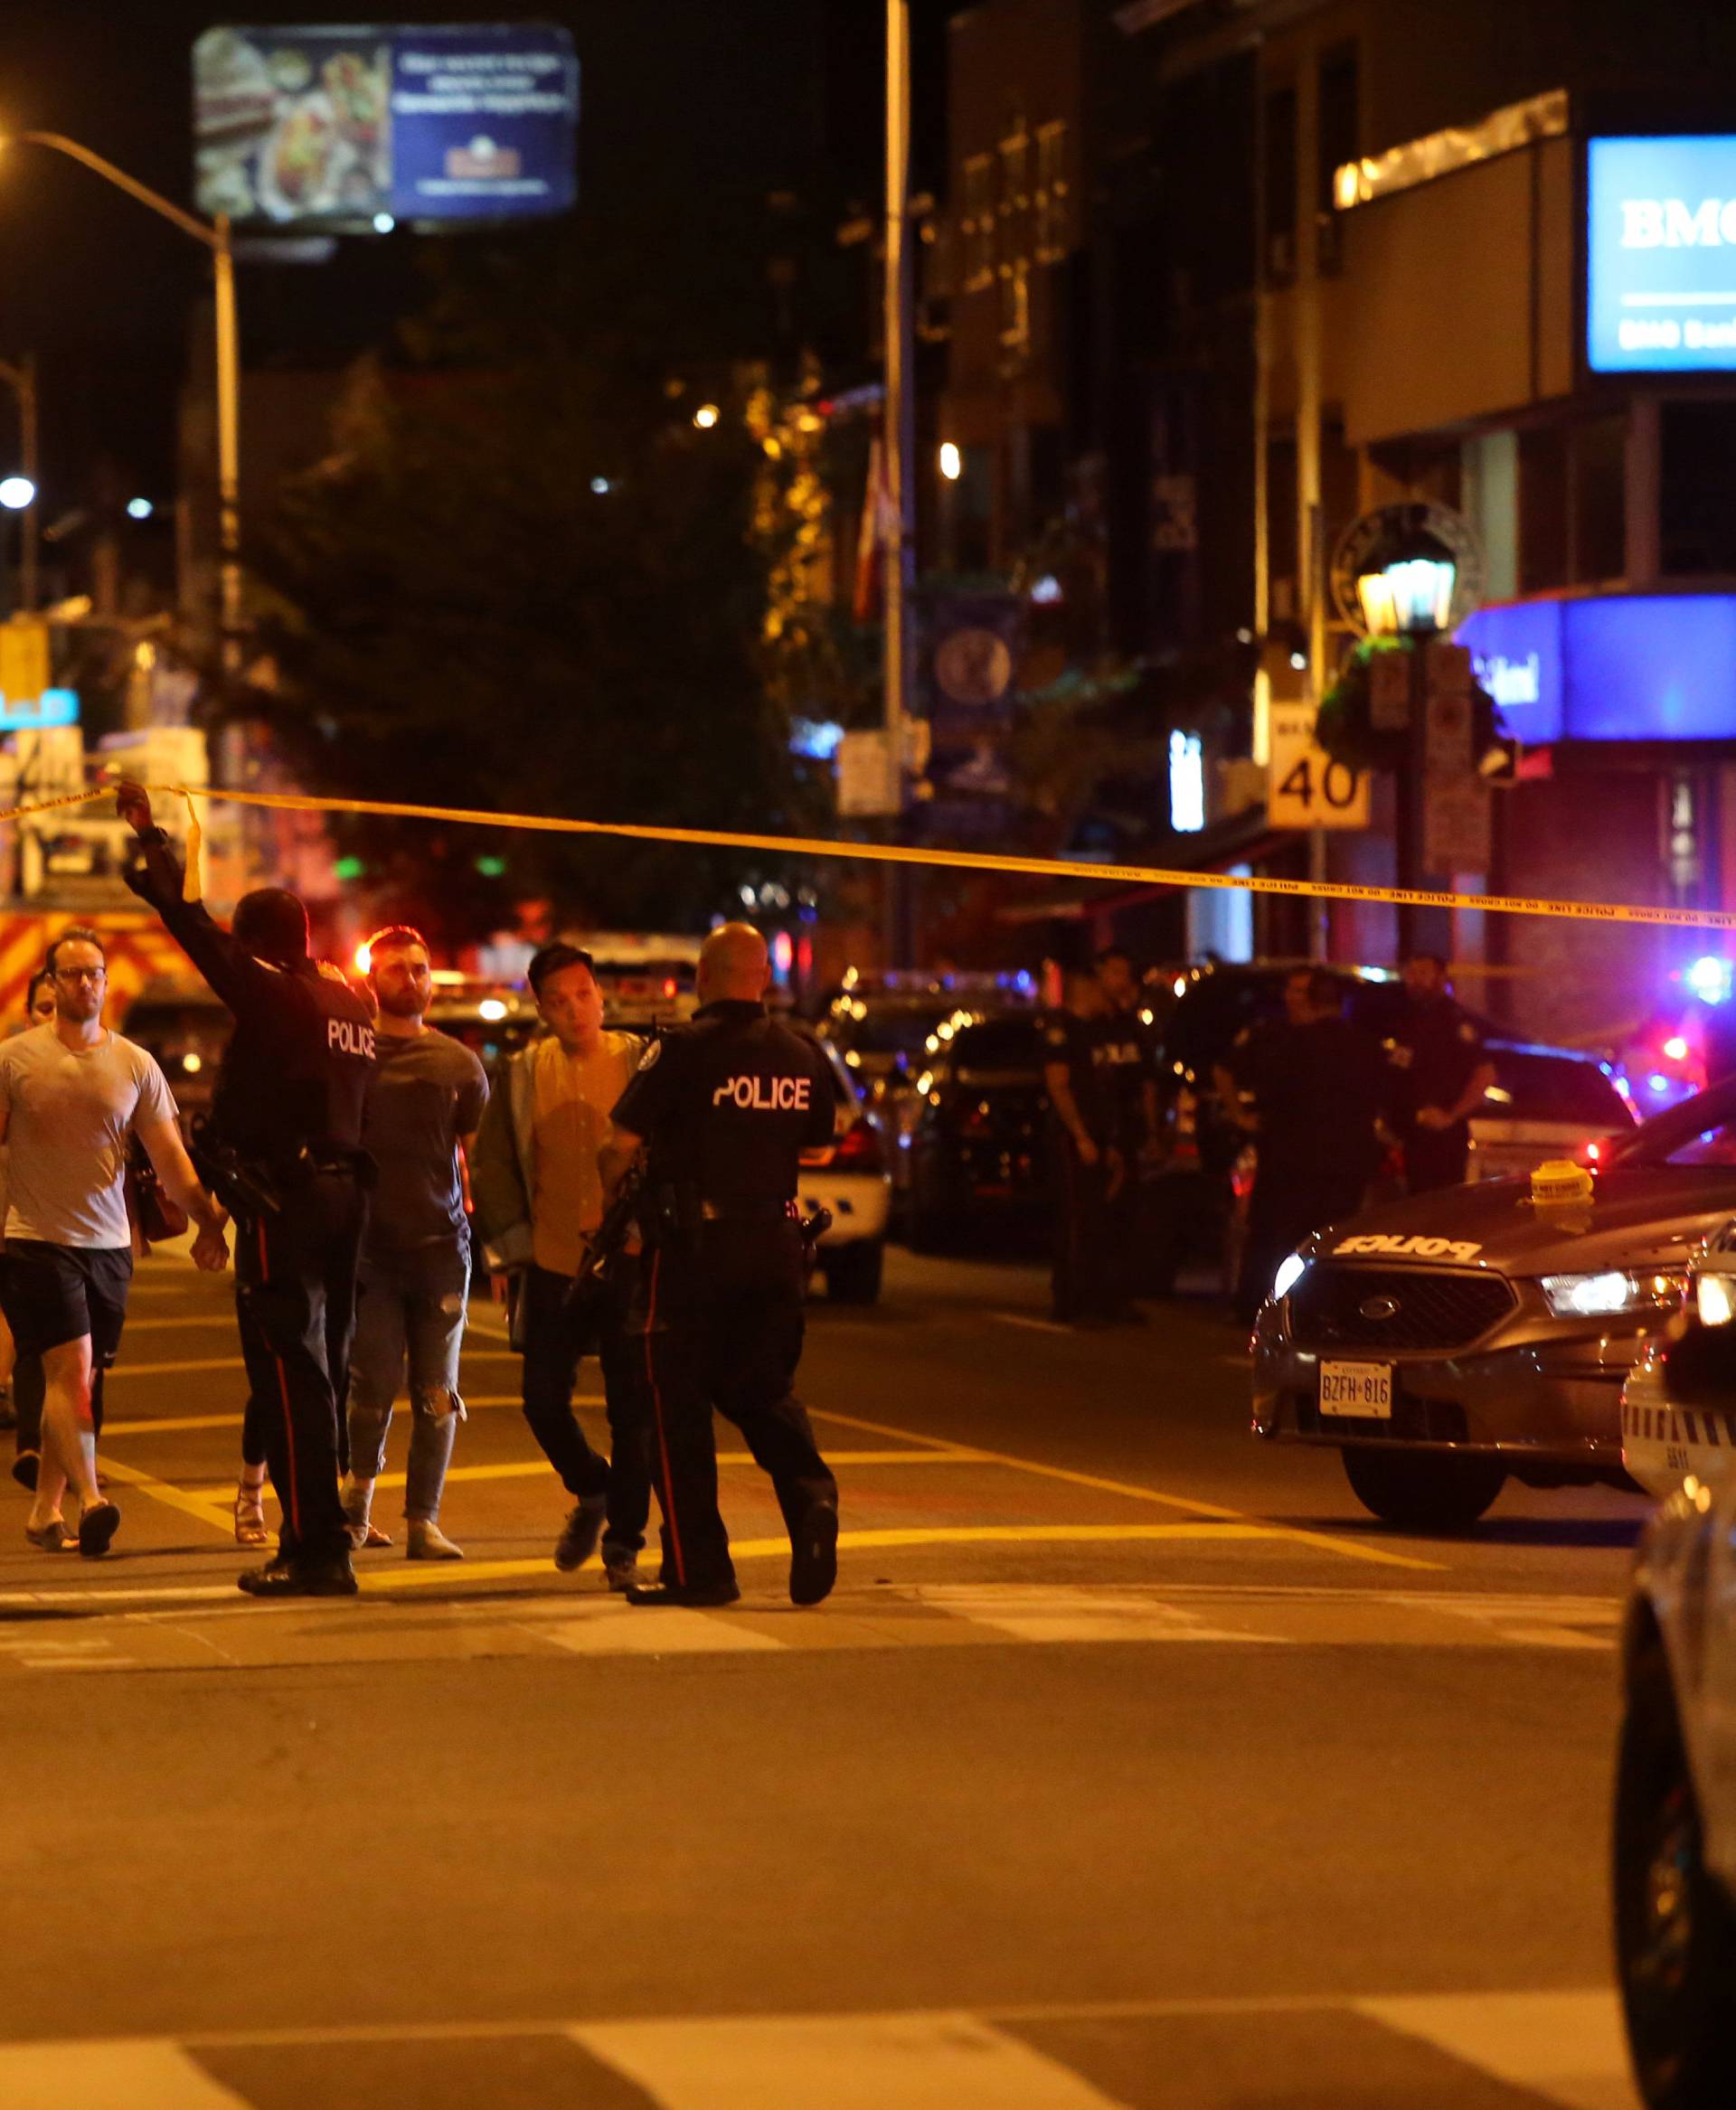 People leave an area taped off by the police near the scene of a mass shooting in Toronto